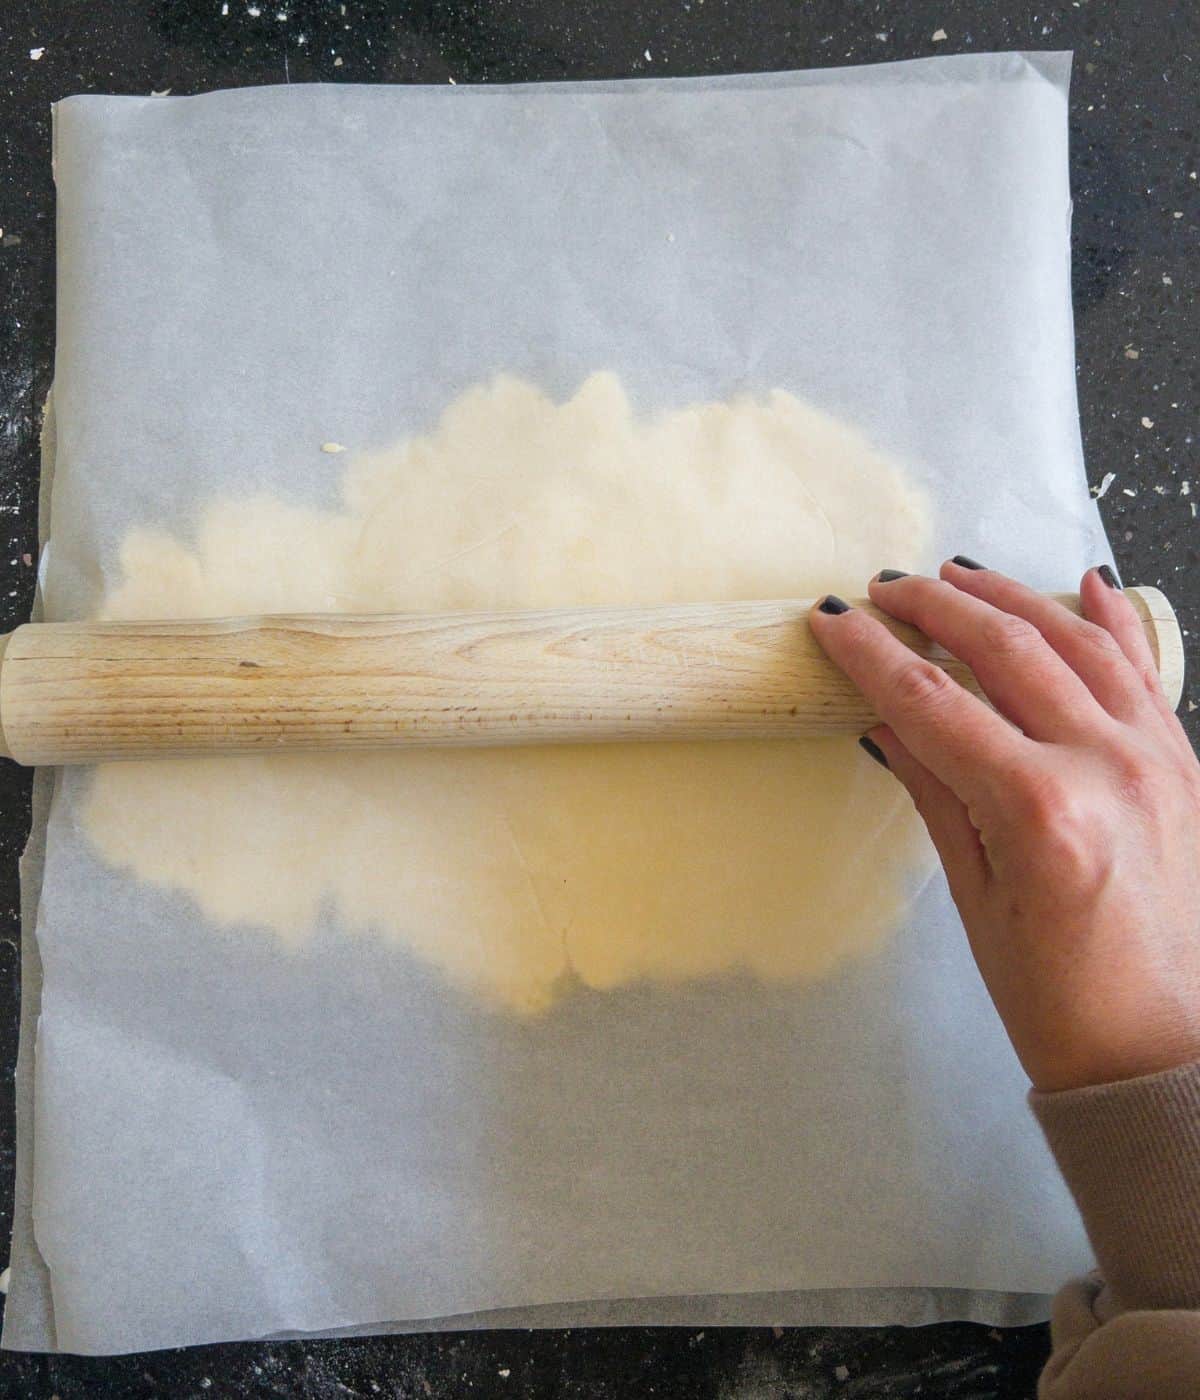 cookie dough being rolled out with a rolling pin between two sheets of greaseproof paper.